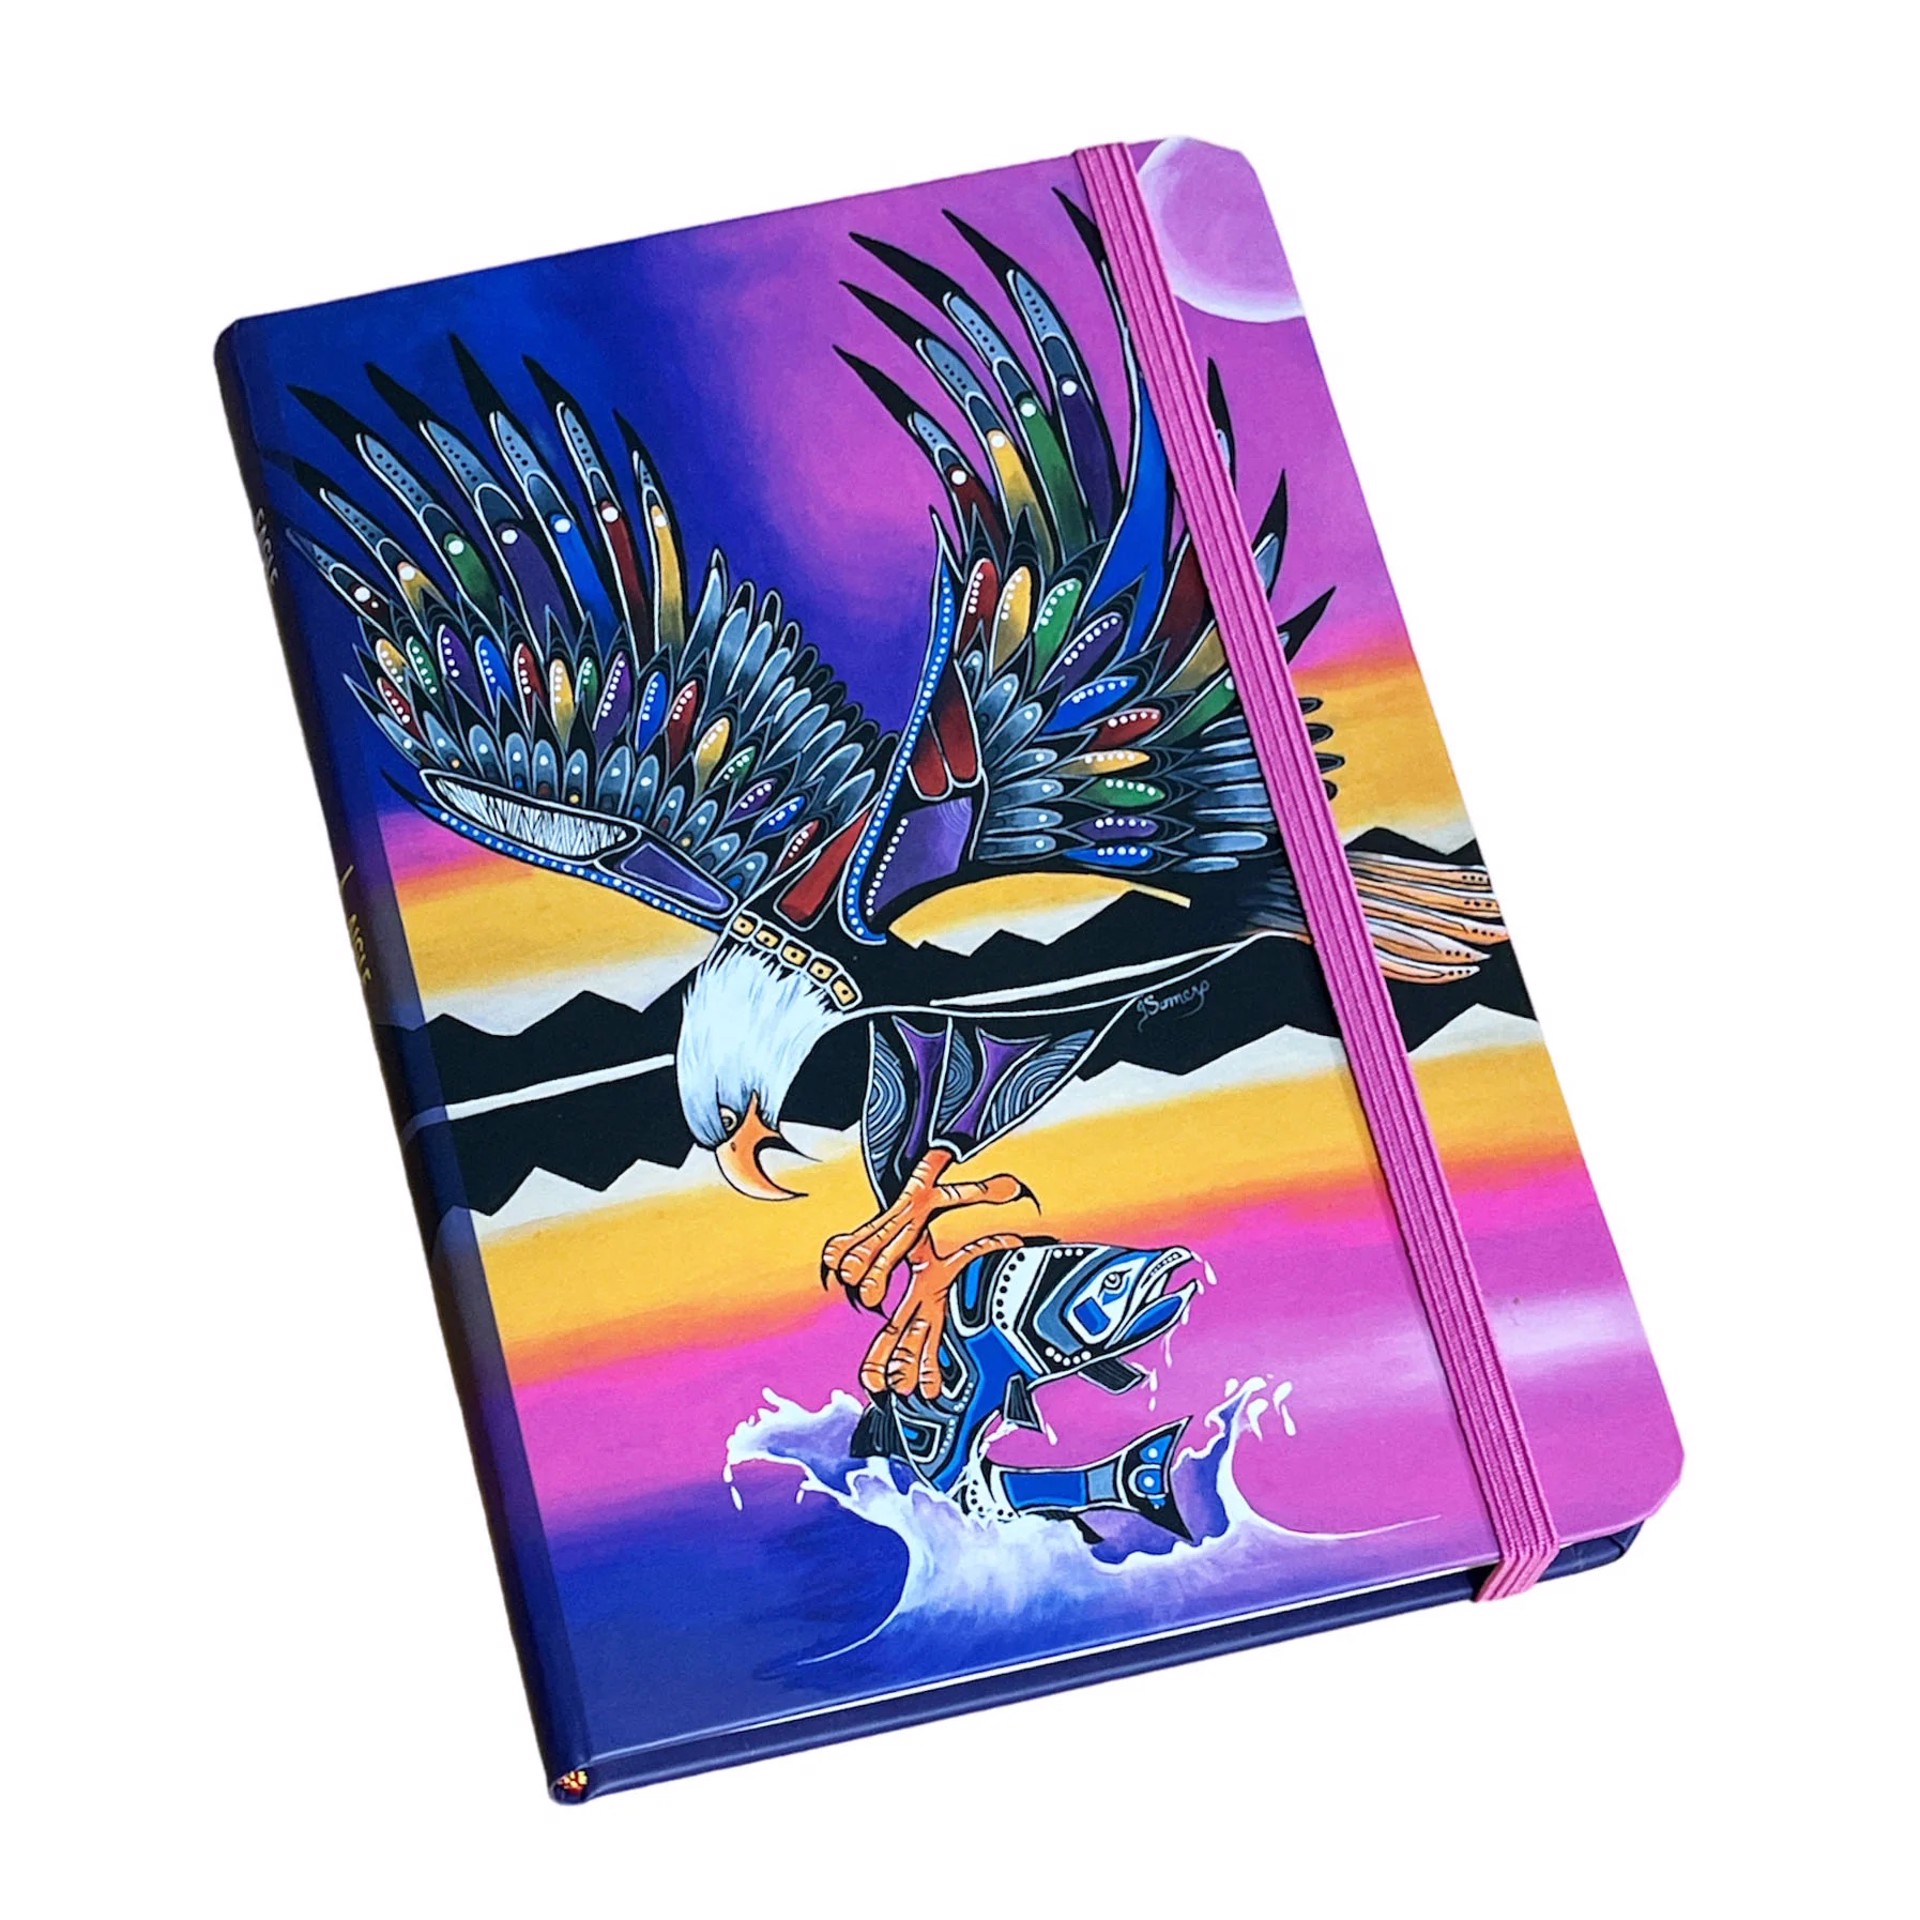 Eagle Hardcover Journal by Jessica Somers